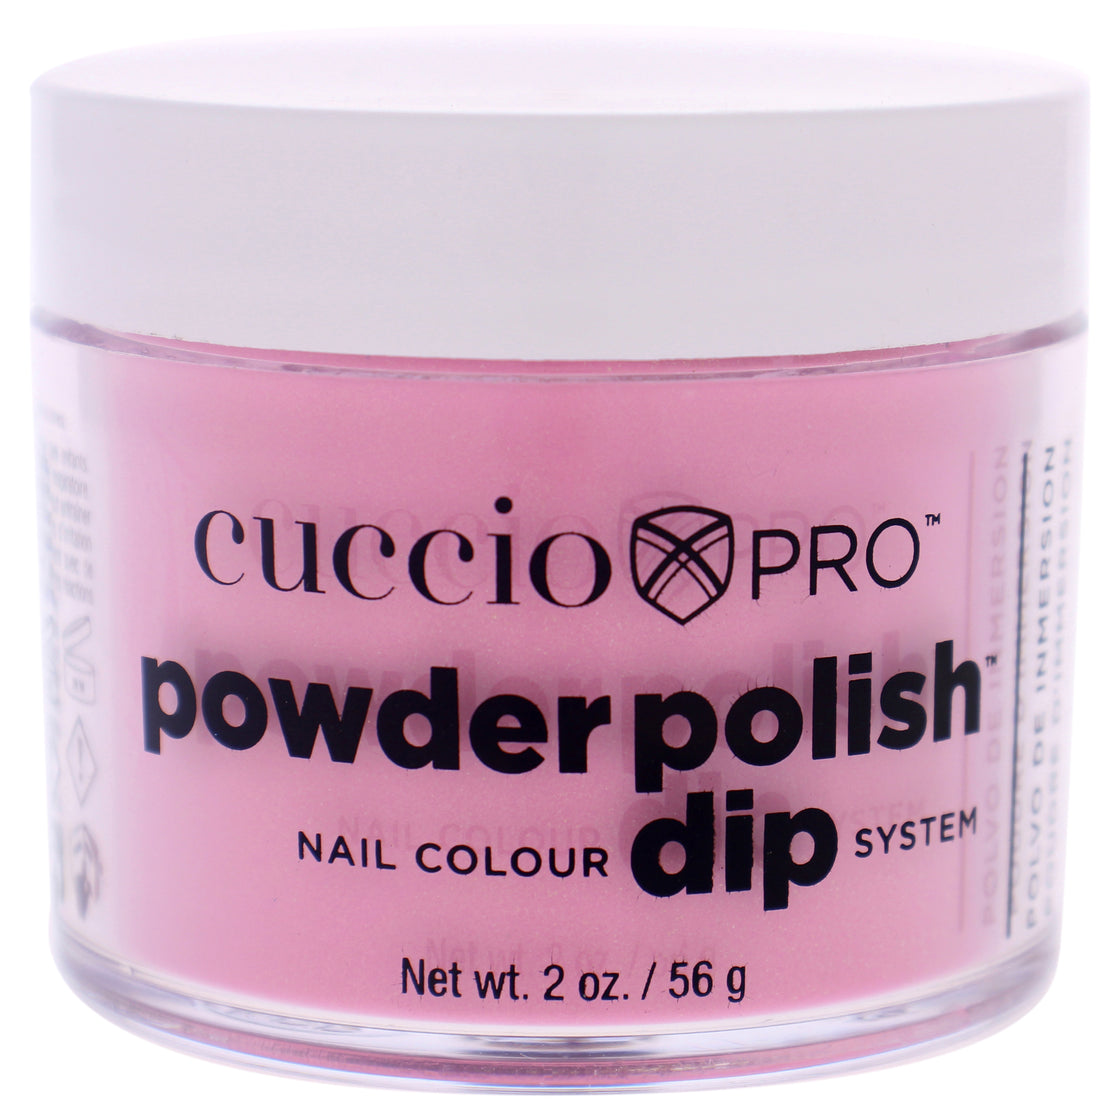 Pro Powder Polish Nail Colour Dip System - Bright Pink with Gold Mica by Cuccio Colour for Women - 1.6 oz Nail Powder